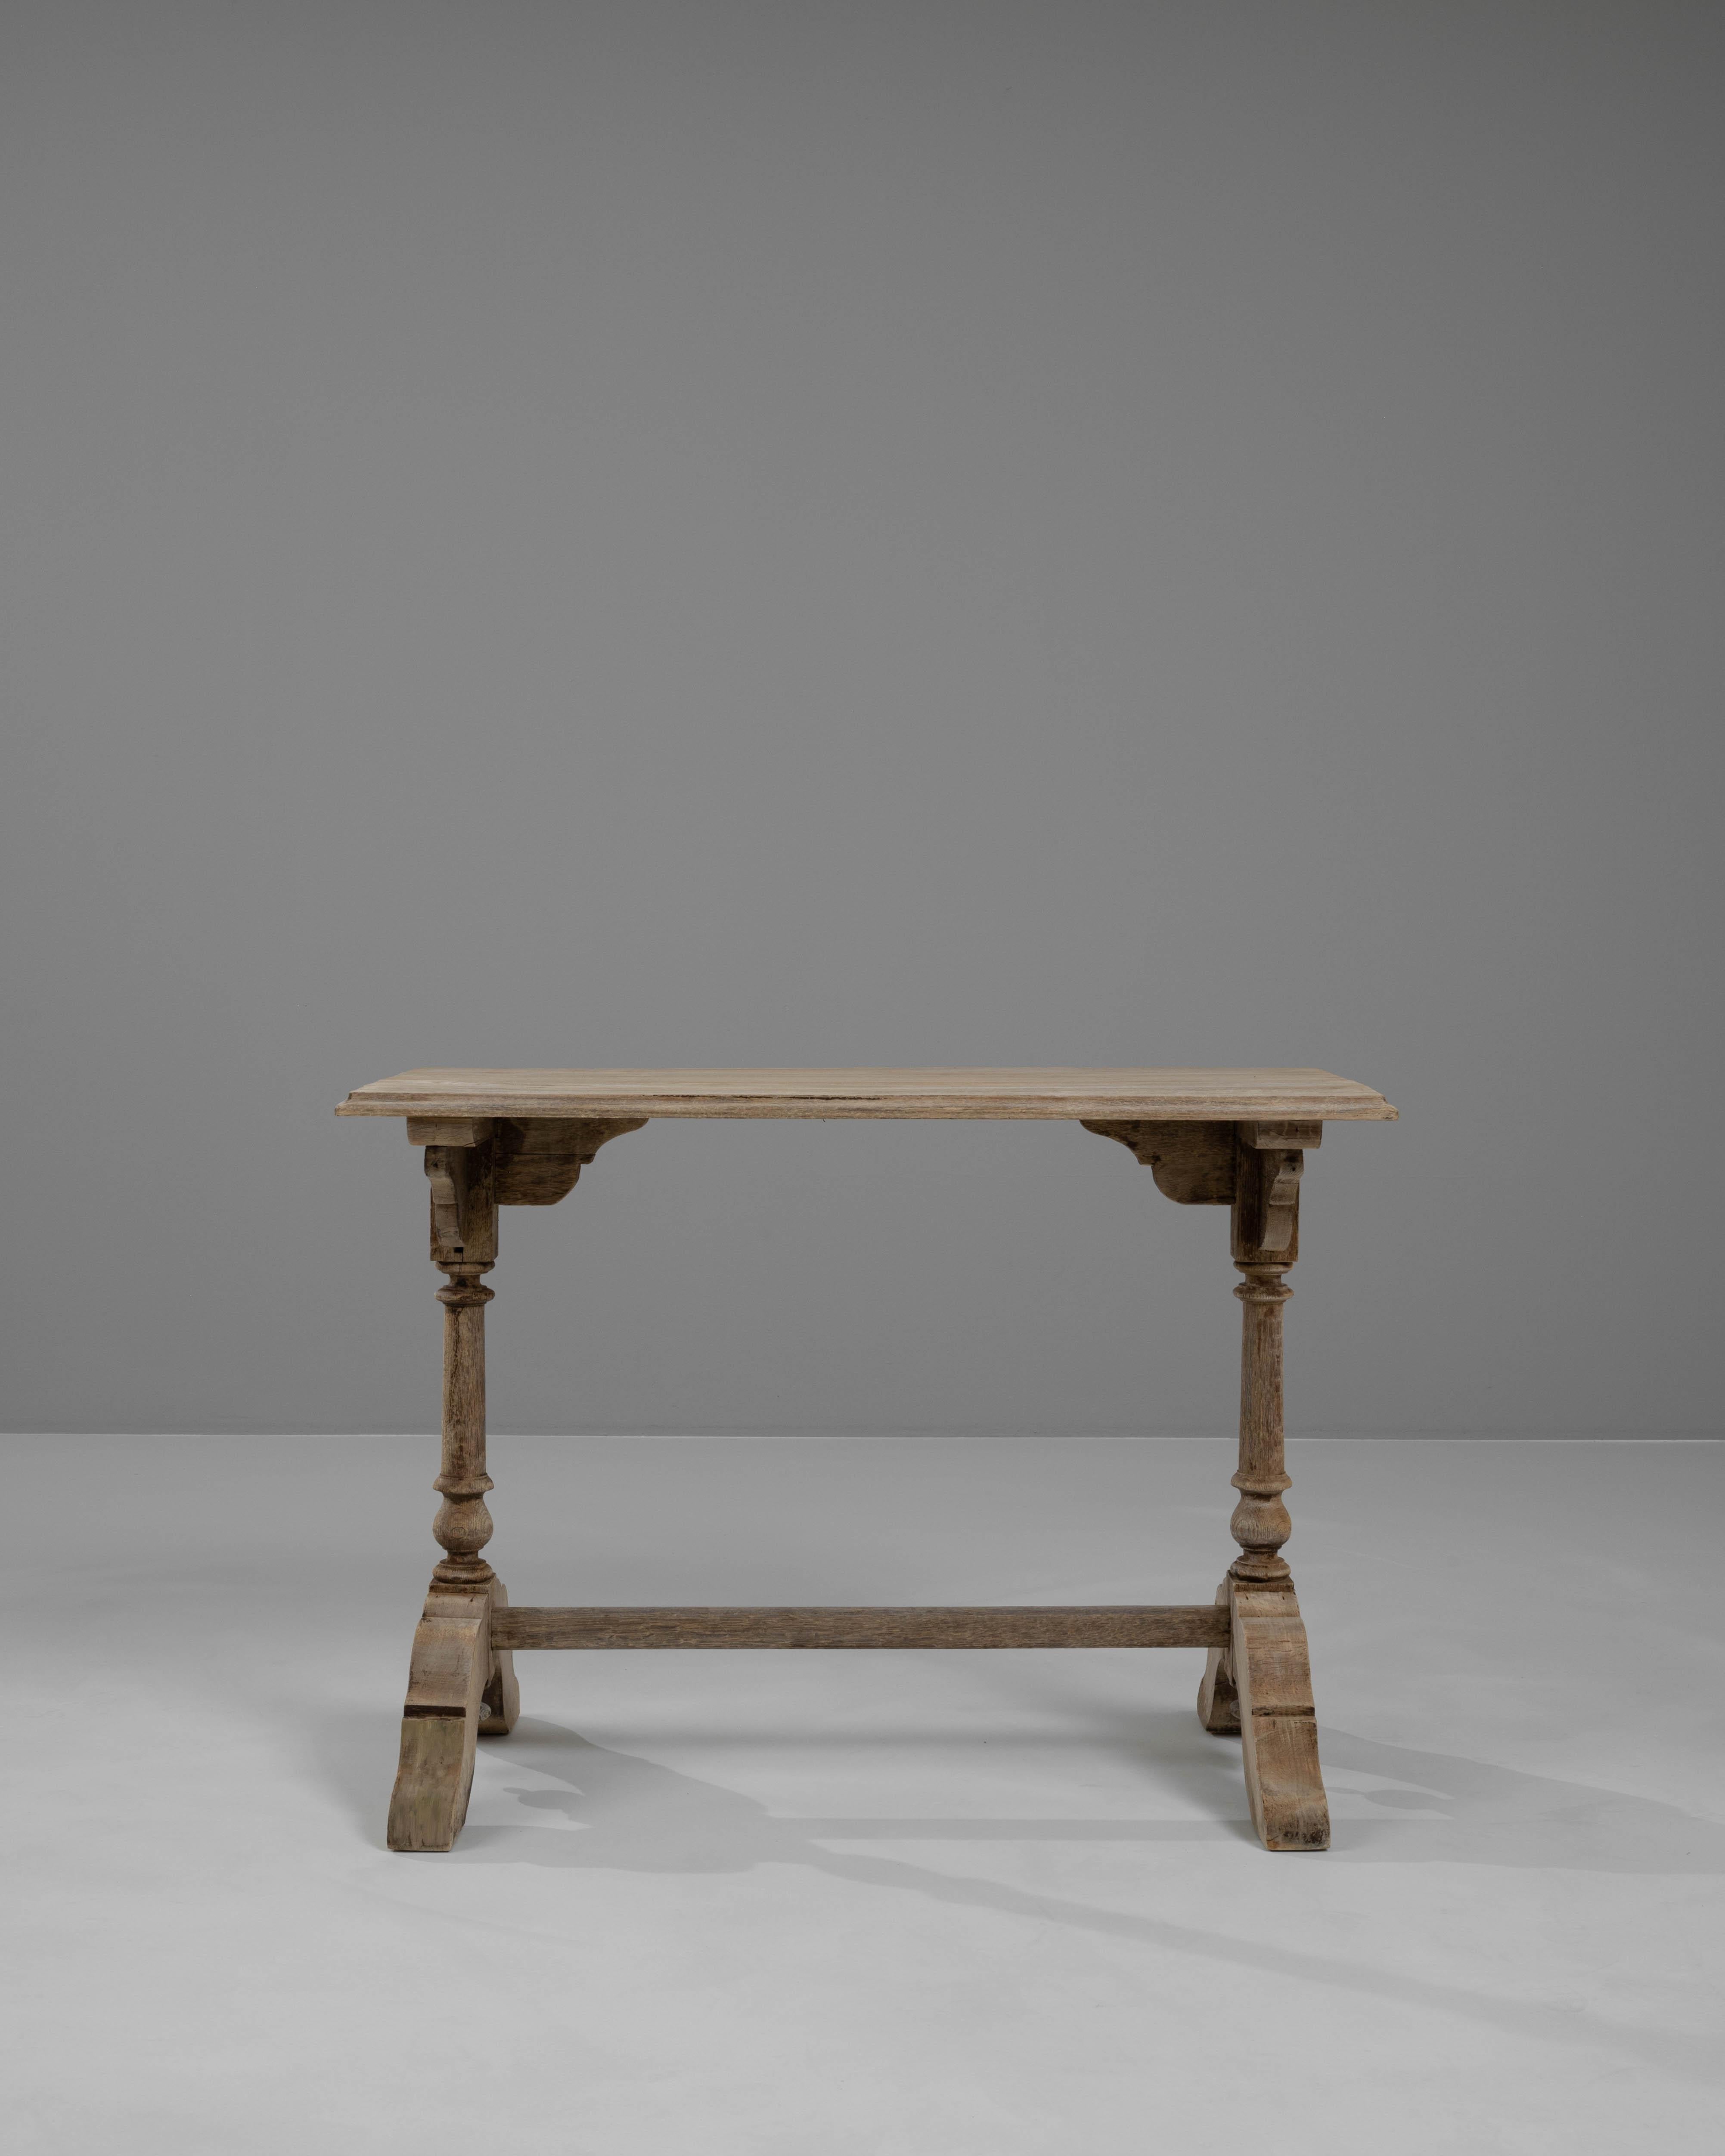 This 1900s French bleached oak side table is a masterpiece of antique design, exuding old-world charm and sophisticated elegance. The table features a unique dual pedestal base, each ending in ornately carved feet with original casters for easy